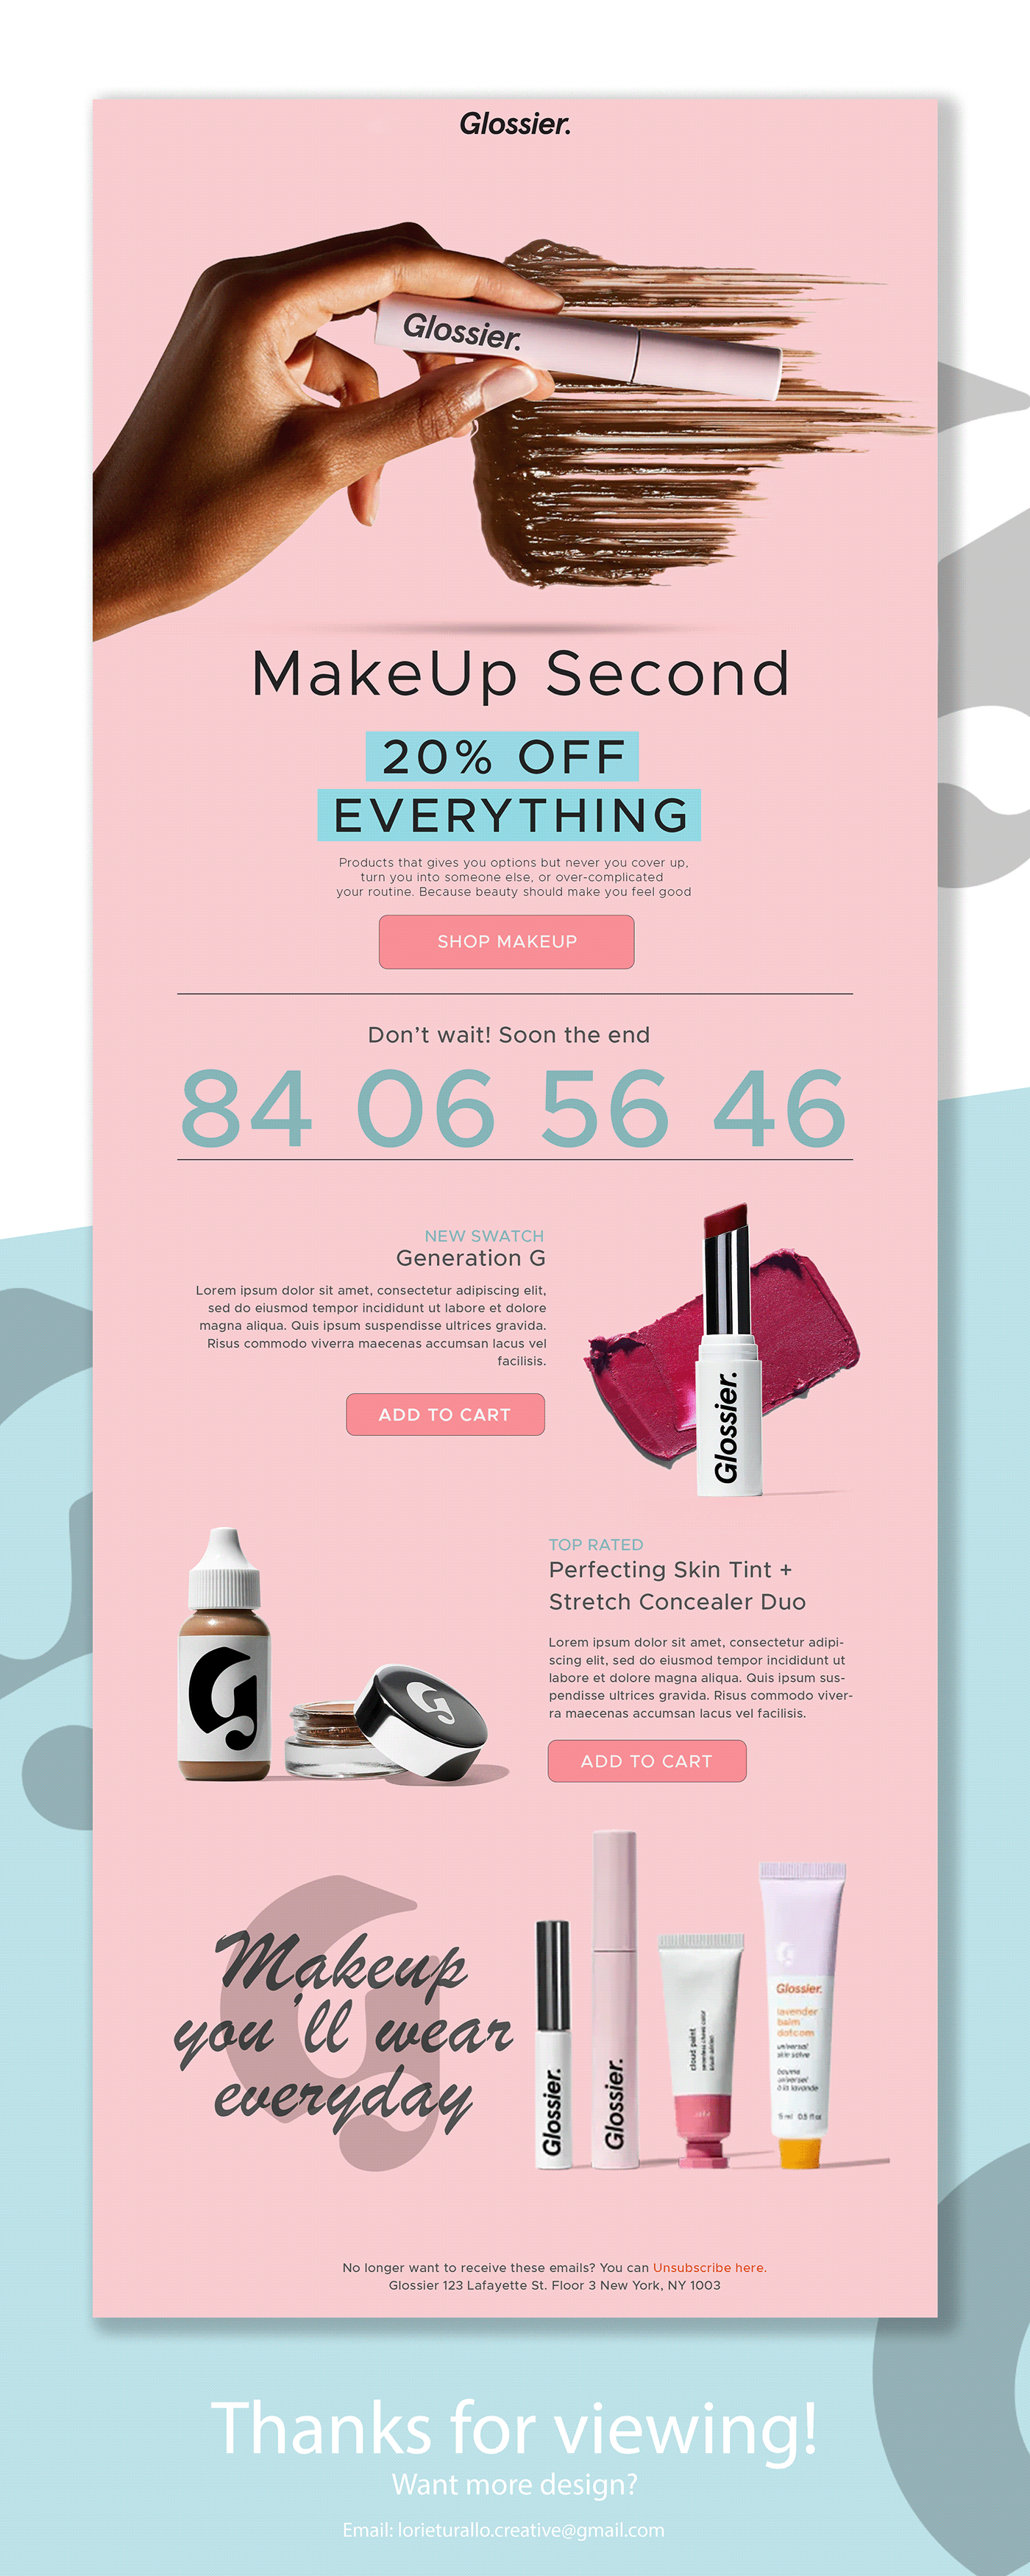 Advertising  beauty cosmetics Email Design email marketing Email Marketing Design email newsletter GLOSSIER makeup ui design